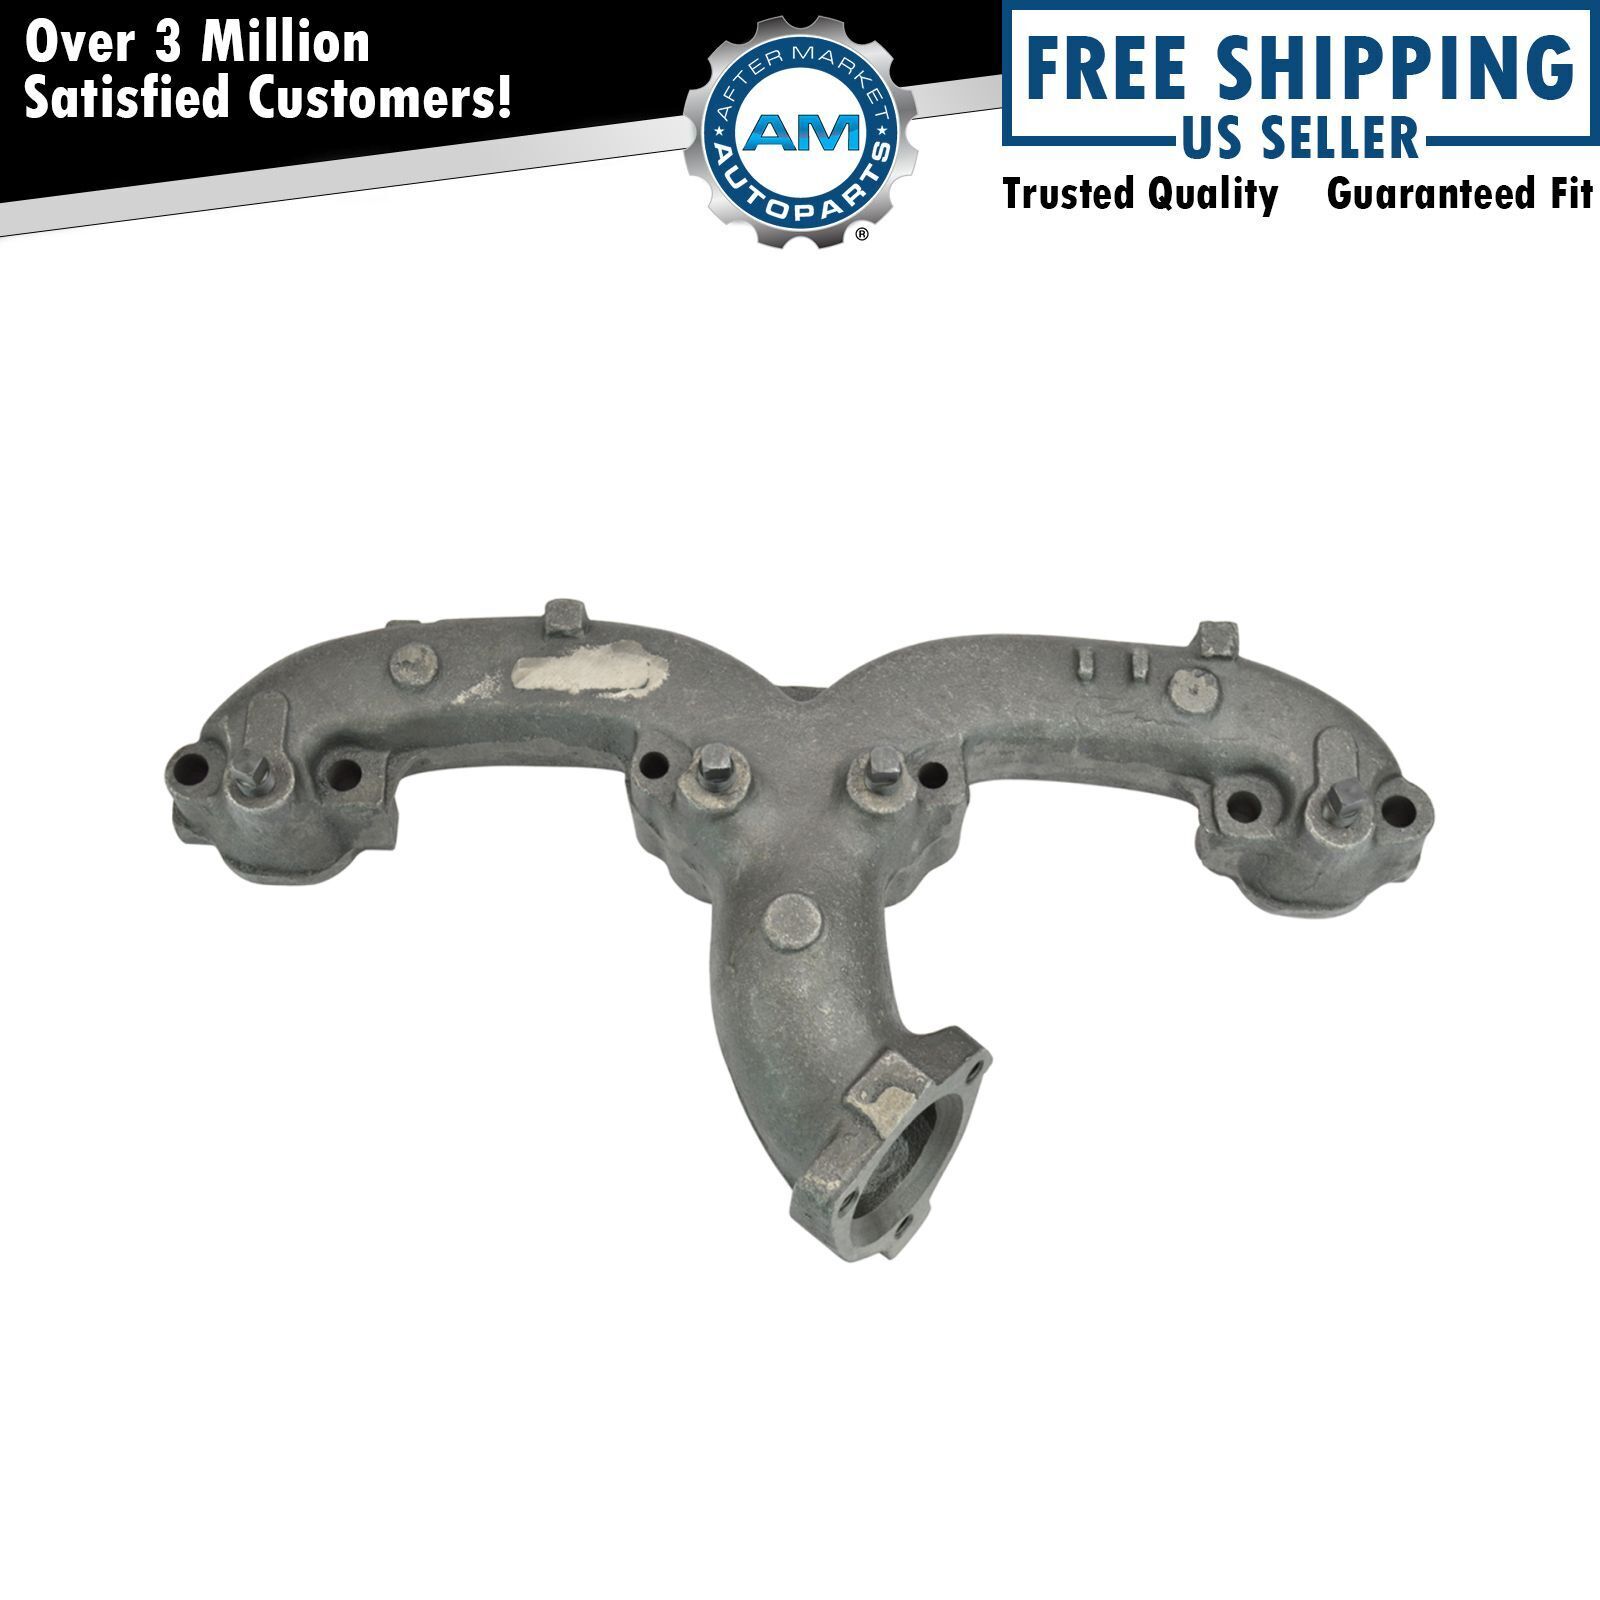 Exhaust Manifold Driver Side Left LH NEW for Chevy GMC Van Pickup Truck V8